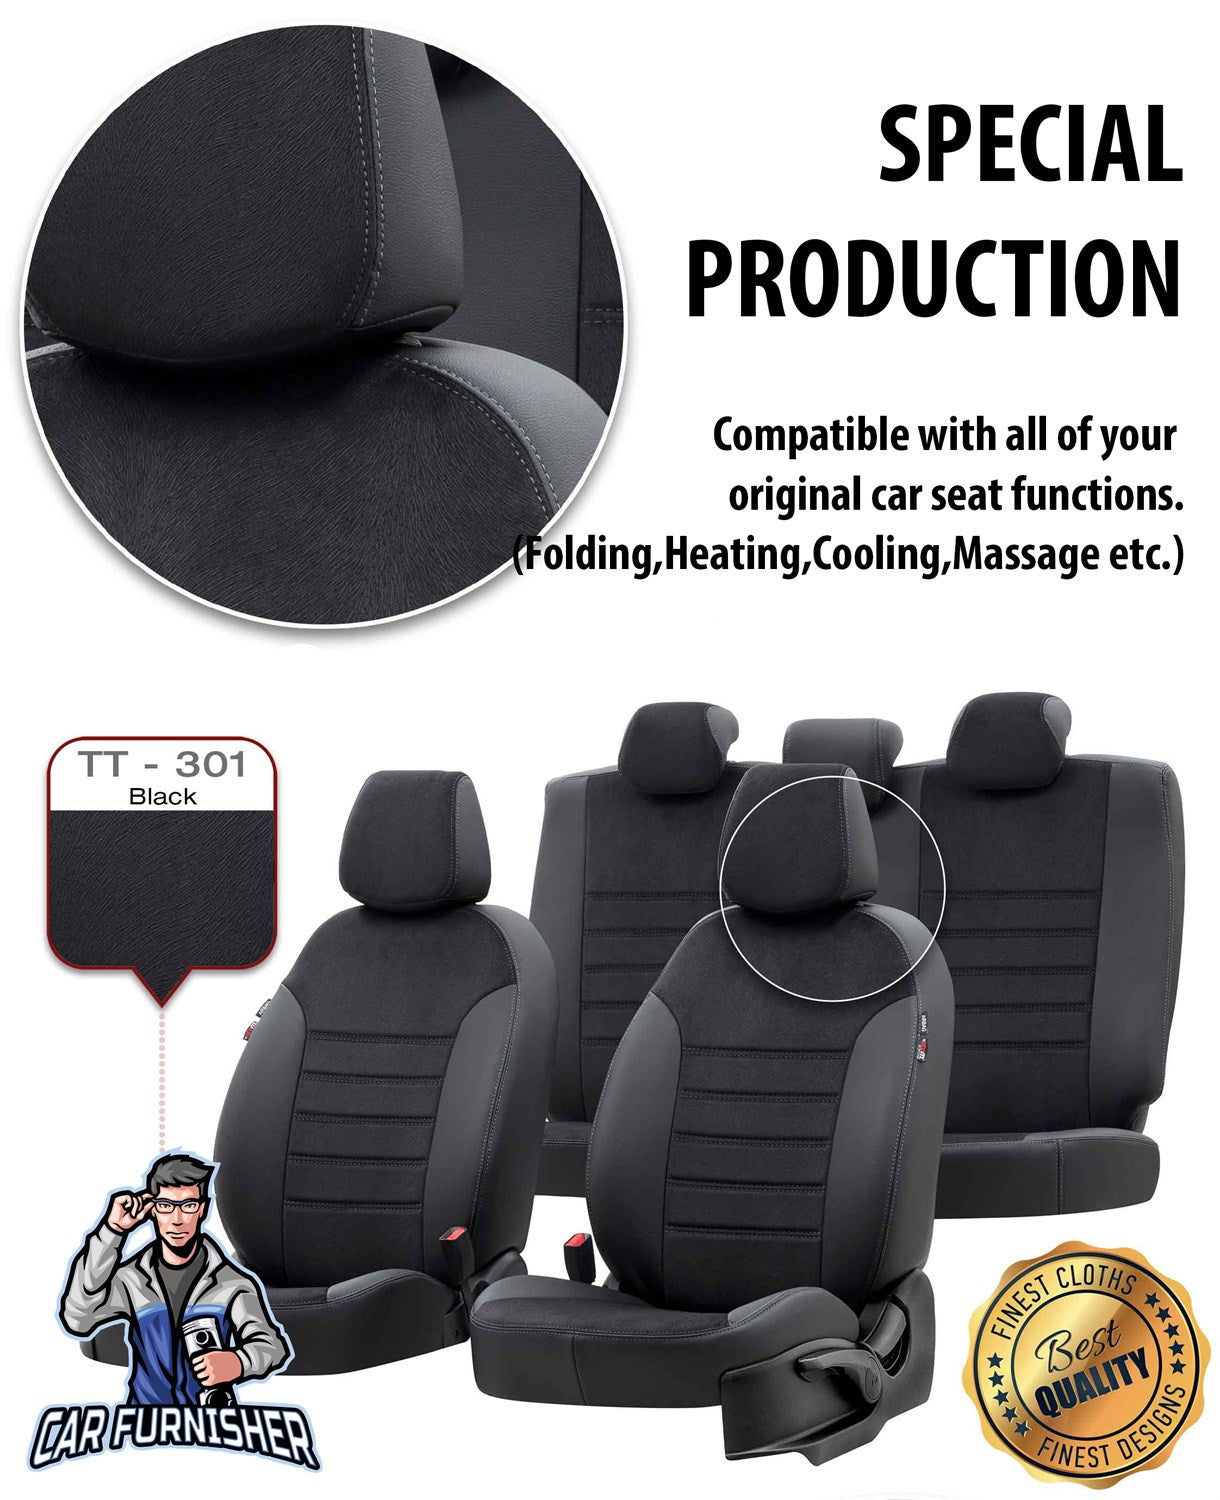 Proton Gen-2 Seat Covers London Foal Feather Design Smoked Black Leather & Foal Feather